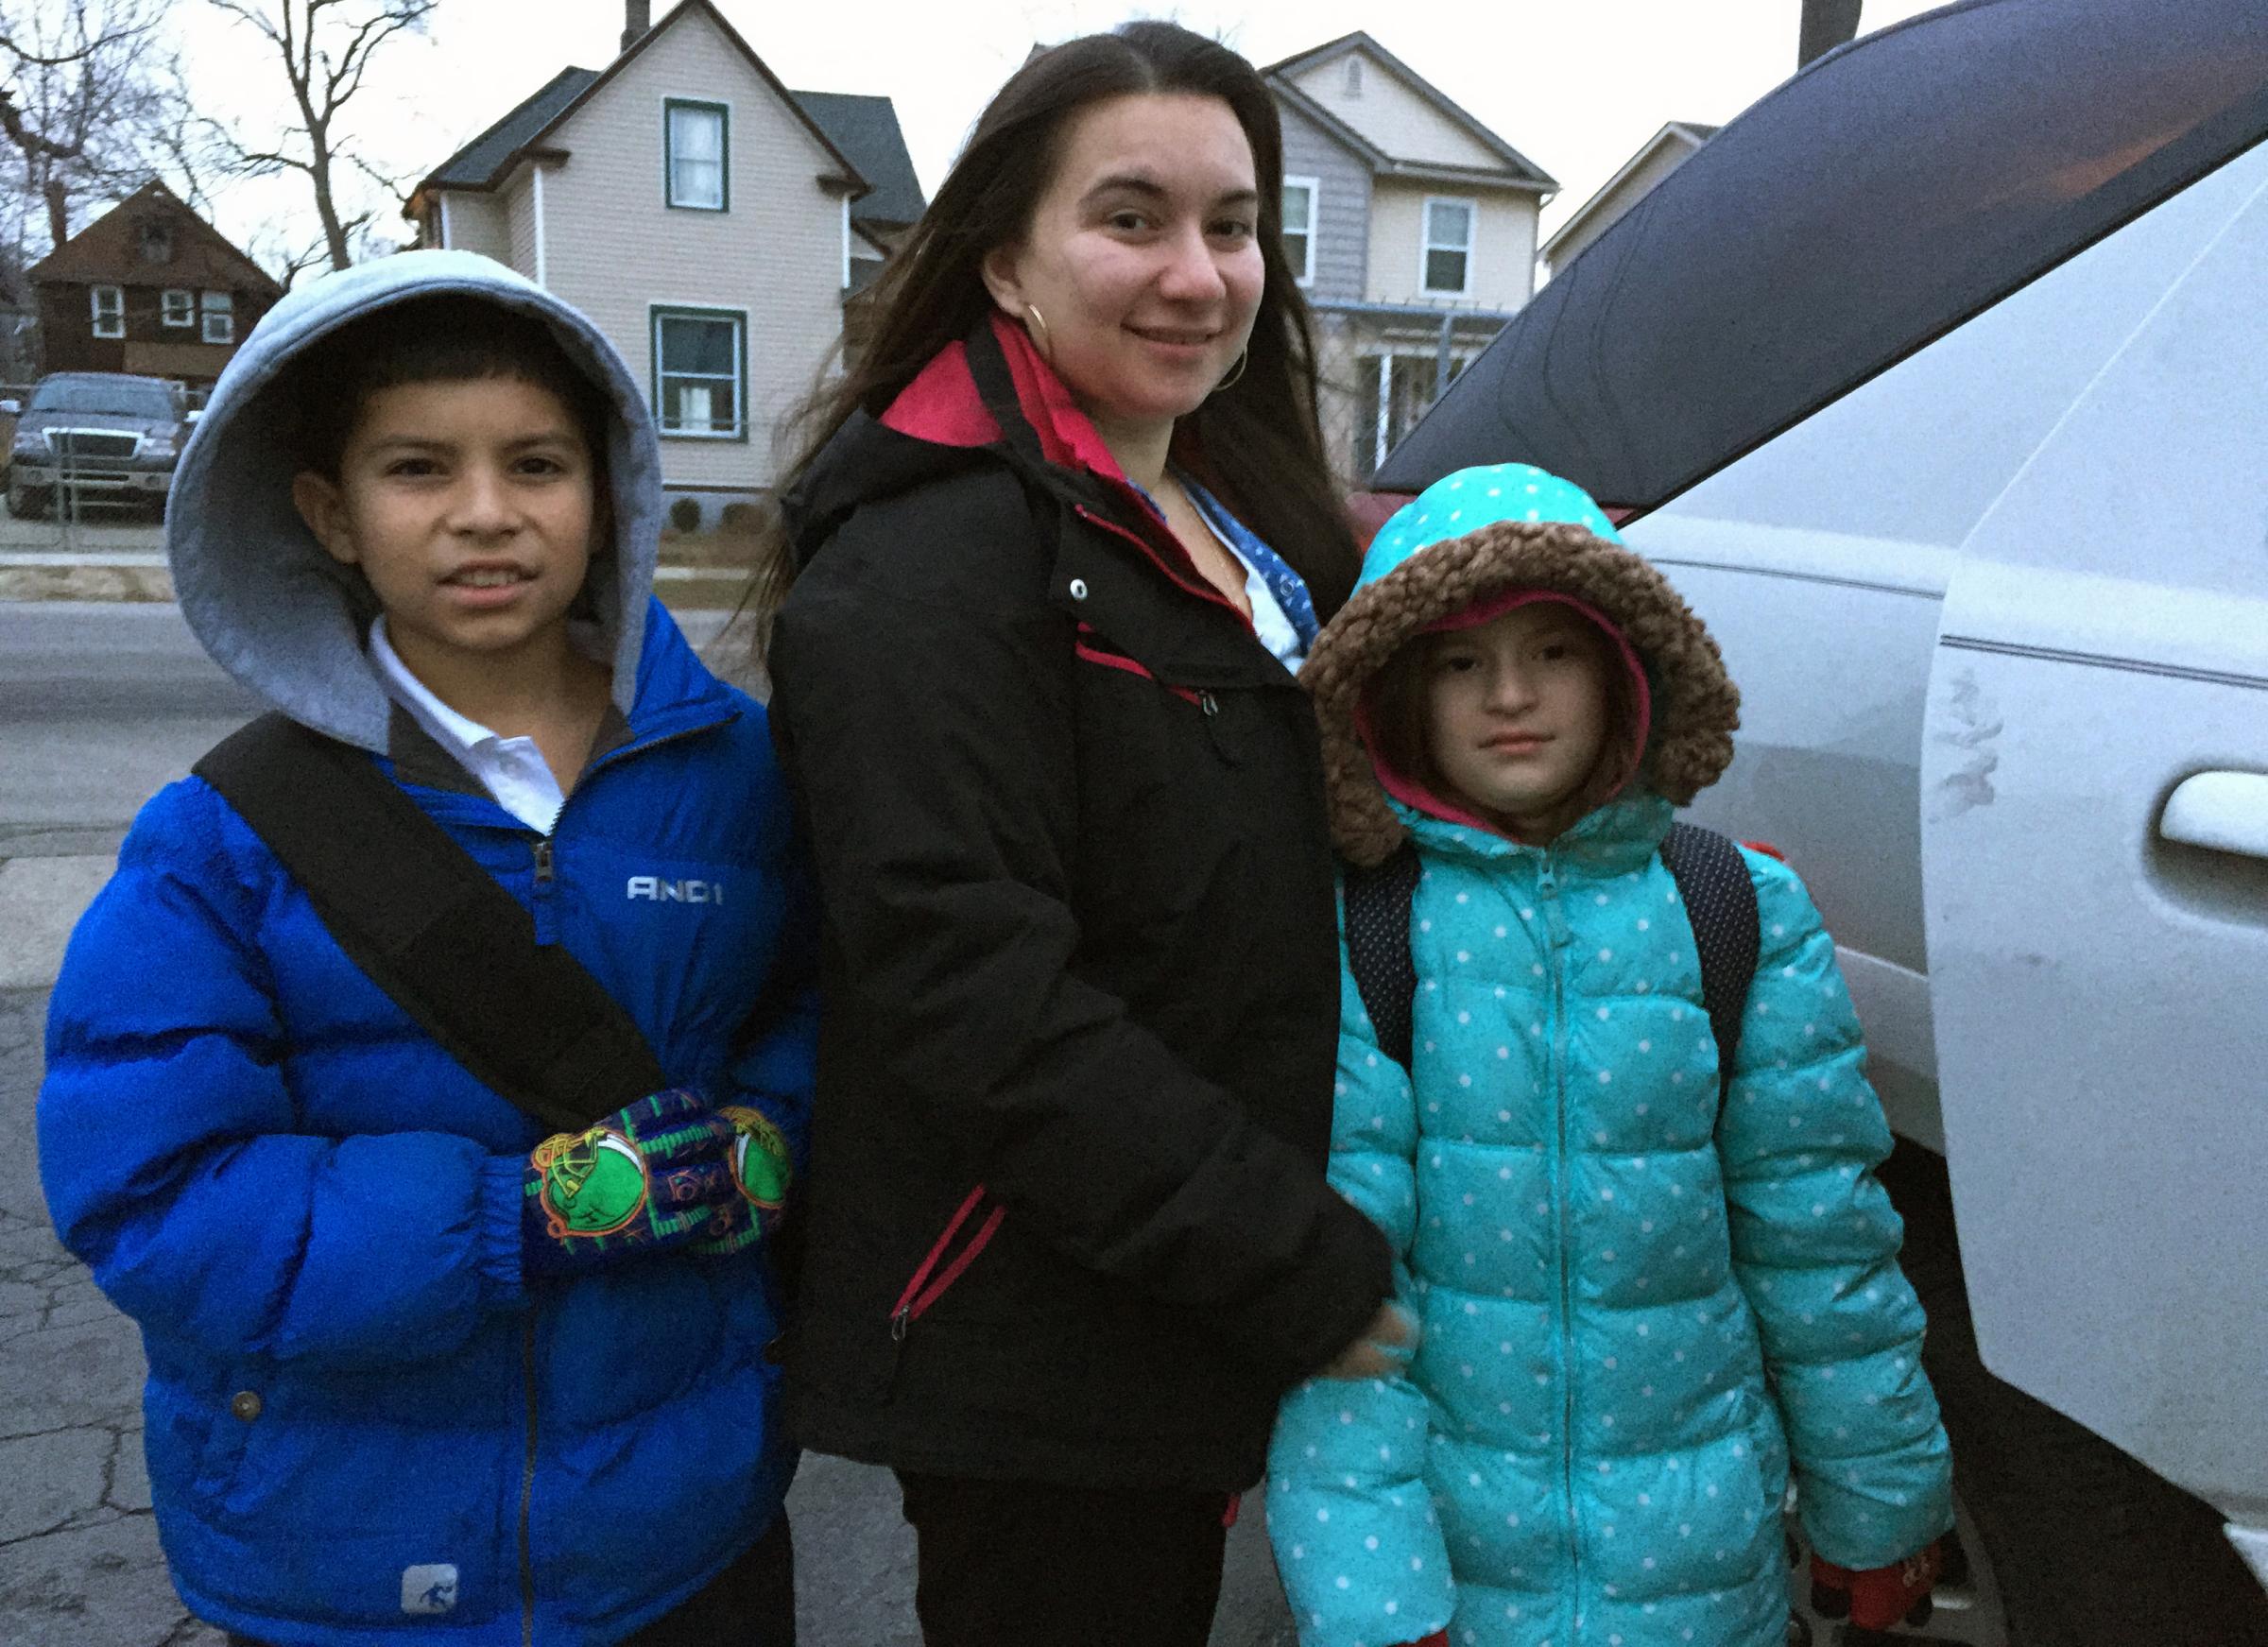 Detroit Public School teacher Alise Anaya with her children Victor, 10, and Analise, 8, before they head to a public school in Southwest Detroit from their home in a nearby suburb.